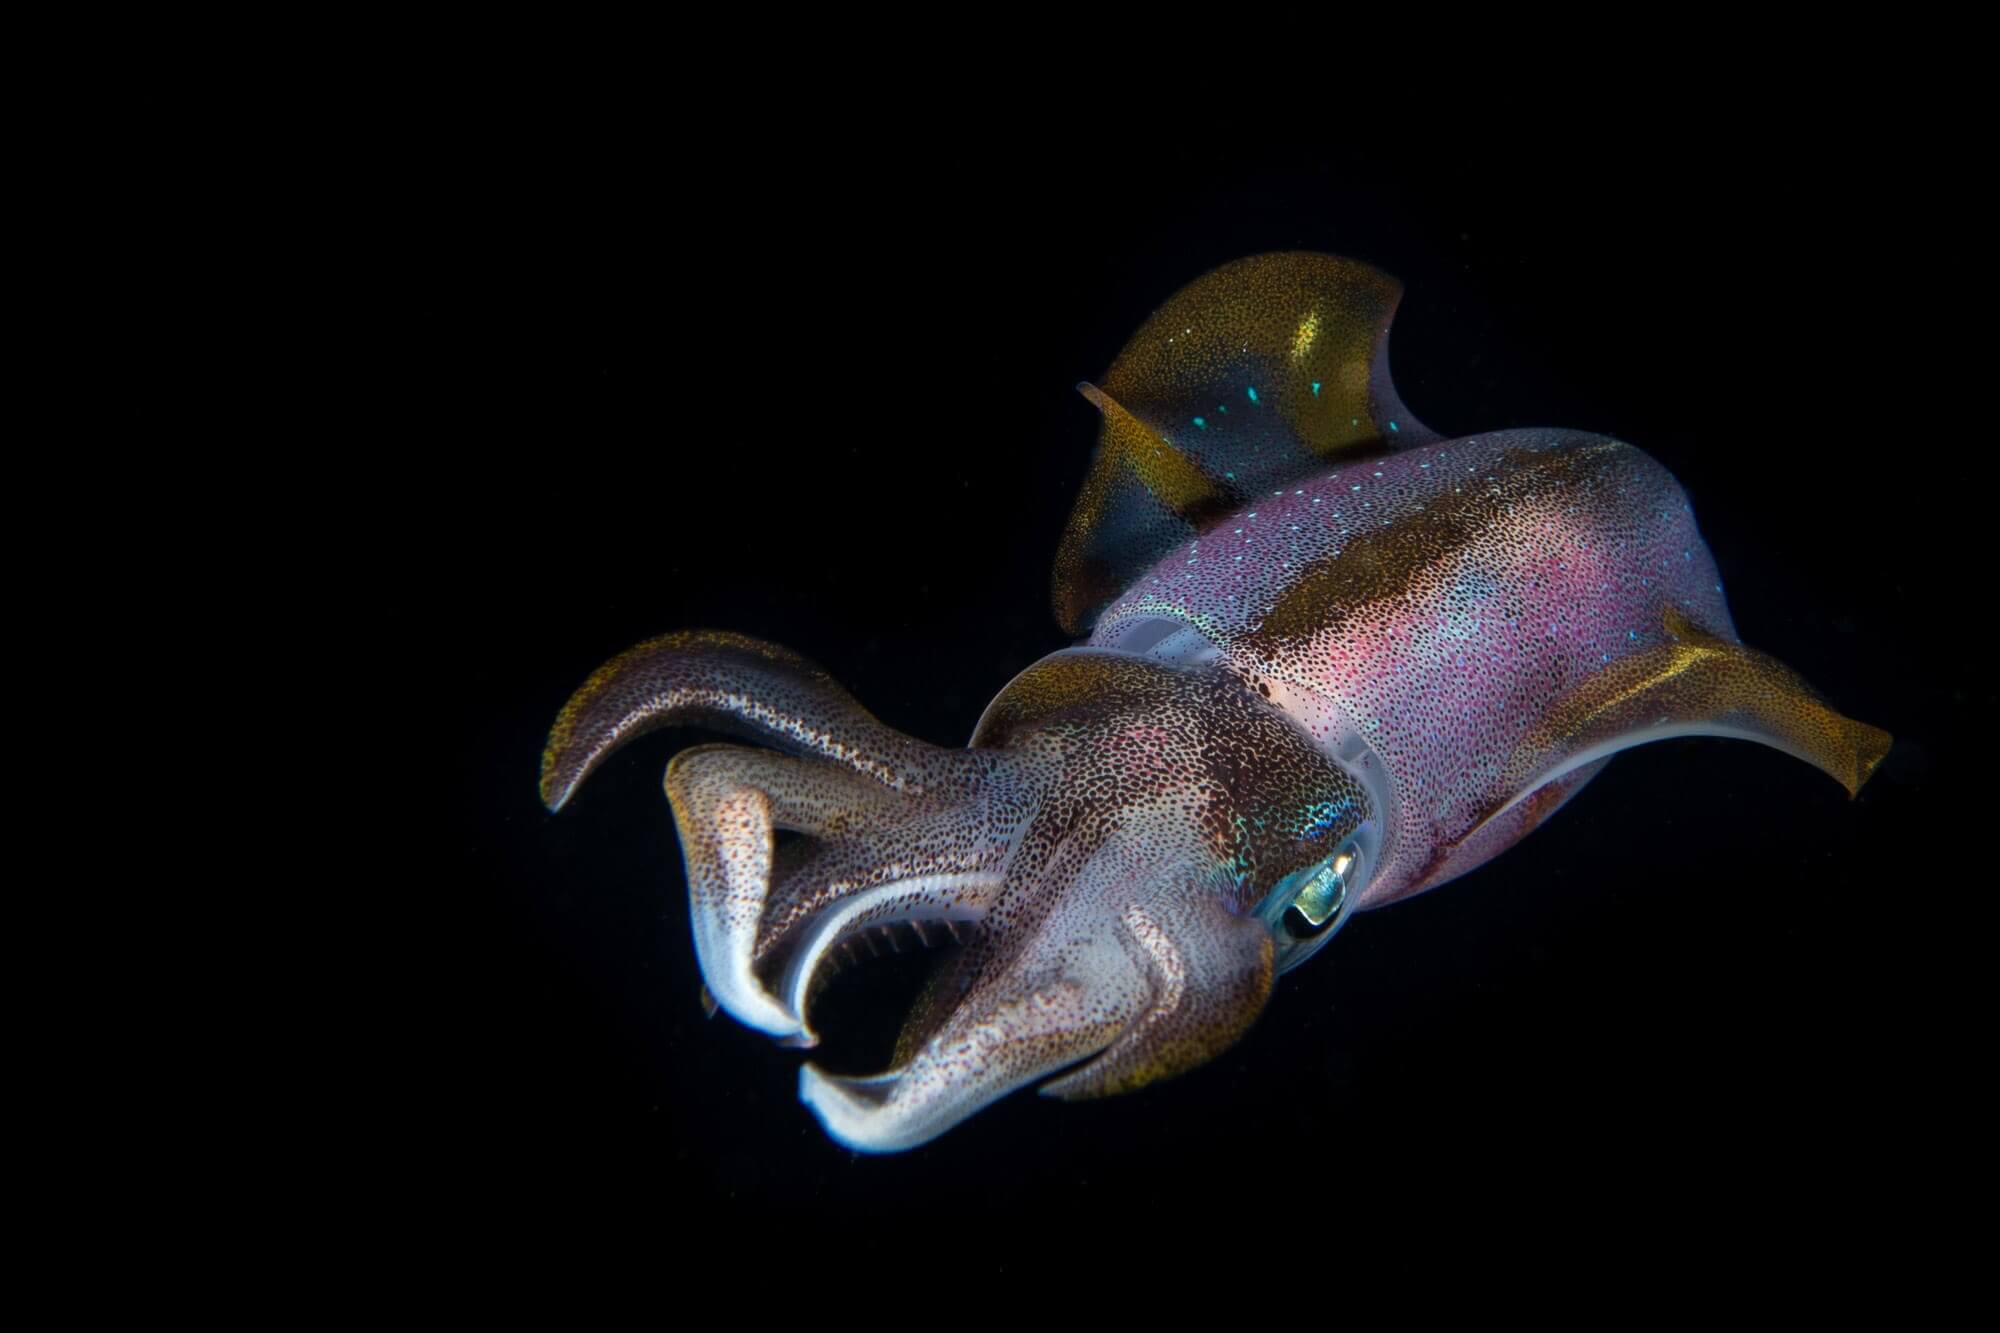 A Caribbean reef squid on a night dive at Over Heat Reef in Roatán